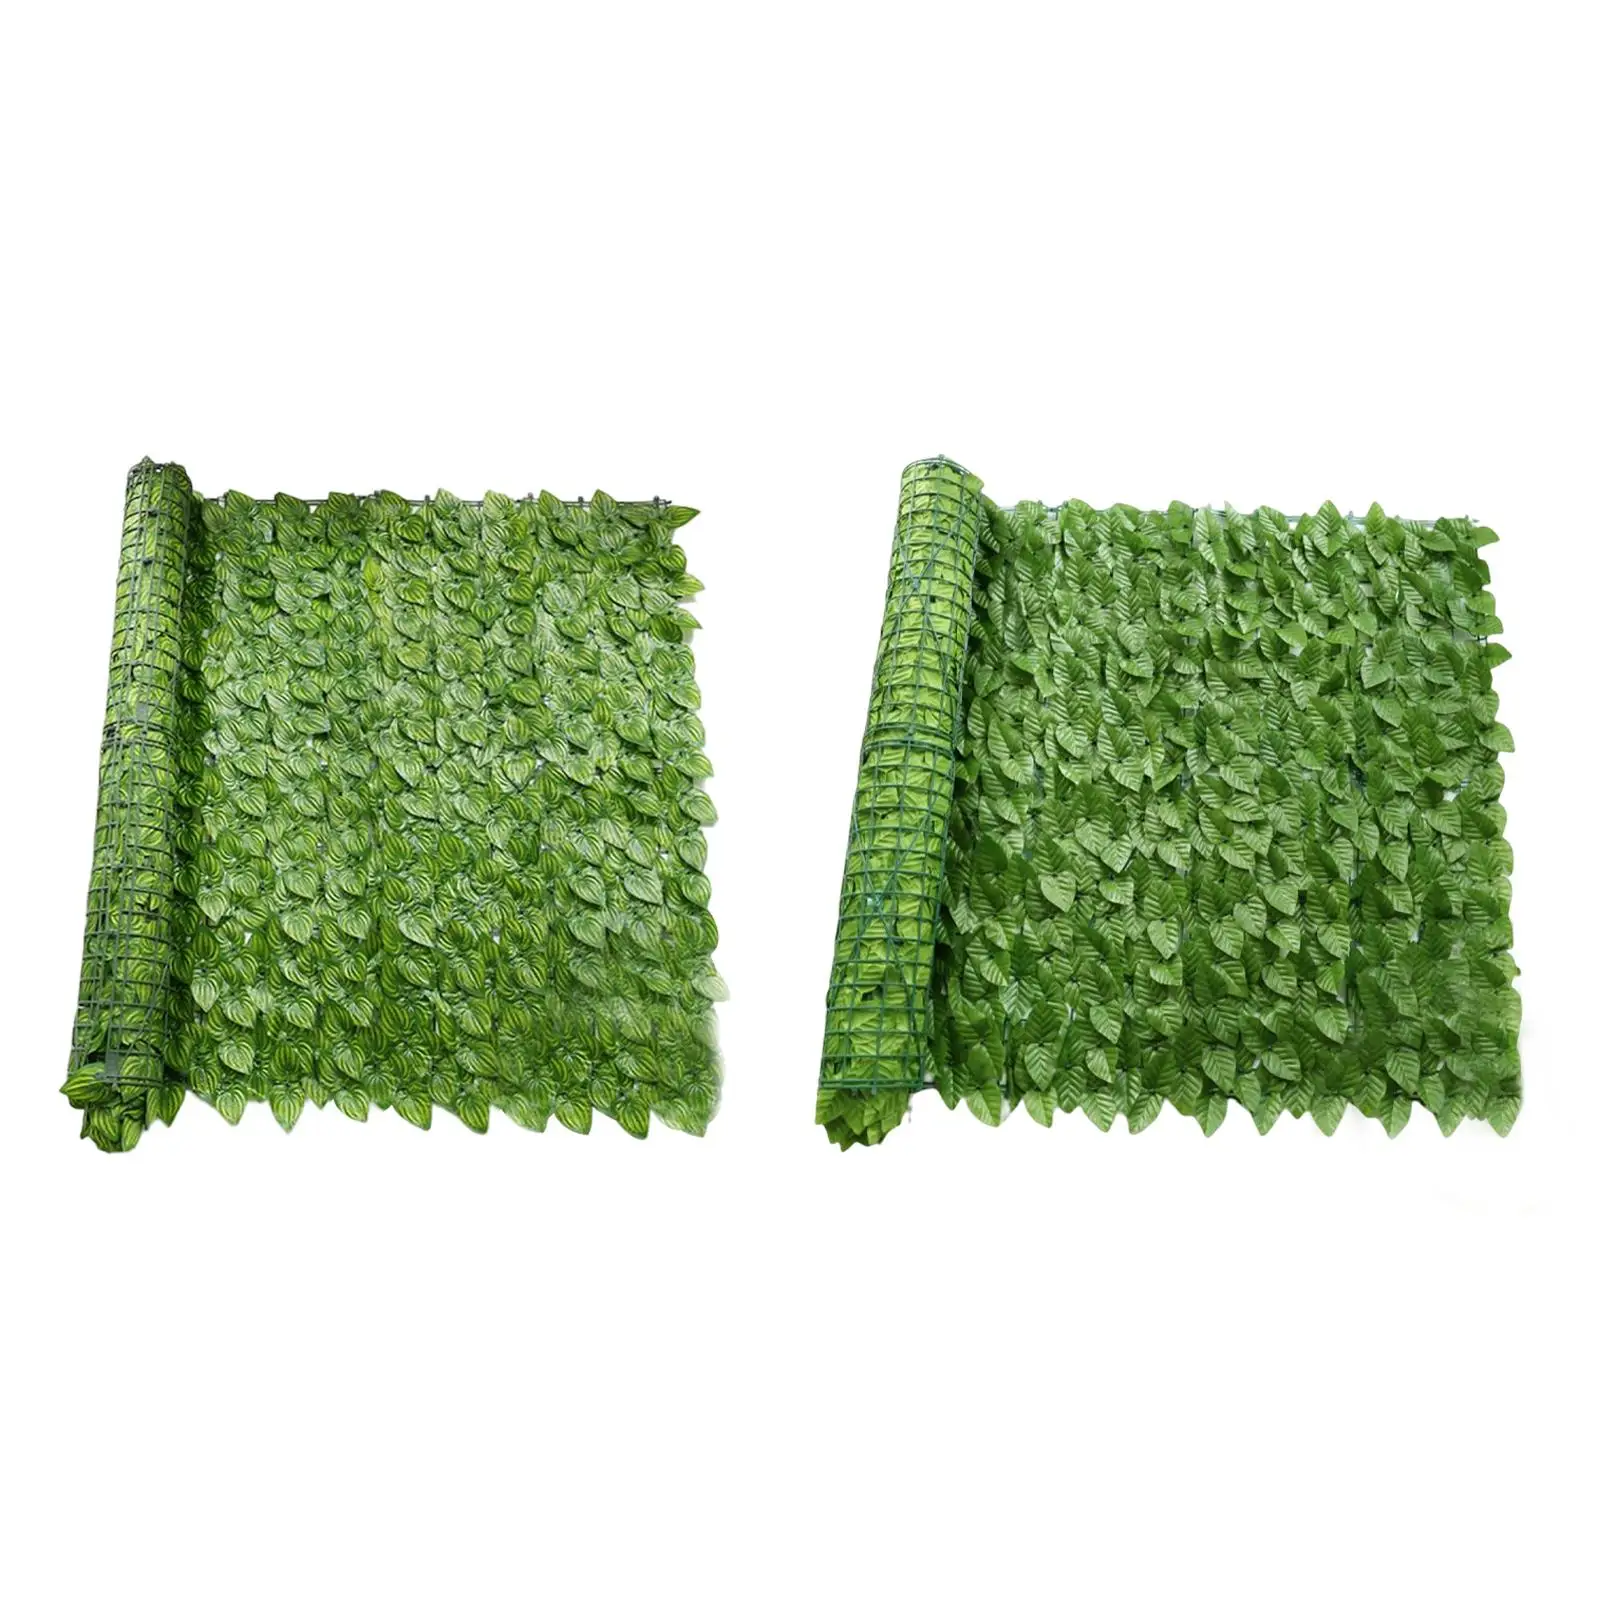 Artificial Faux Leaf Privacy Fence Wall Screen 0.5MX1M Sun protected Ornament Hedges Fence for Home Yard Outdoor Backyard Decor